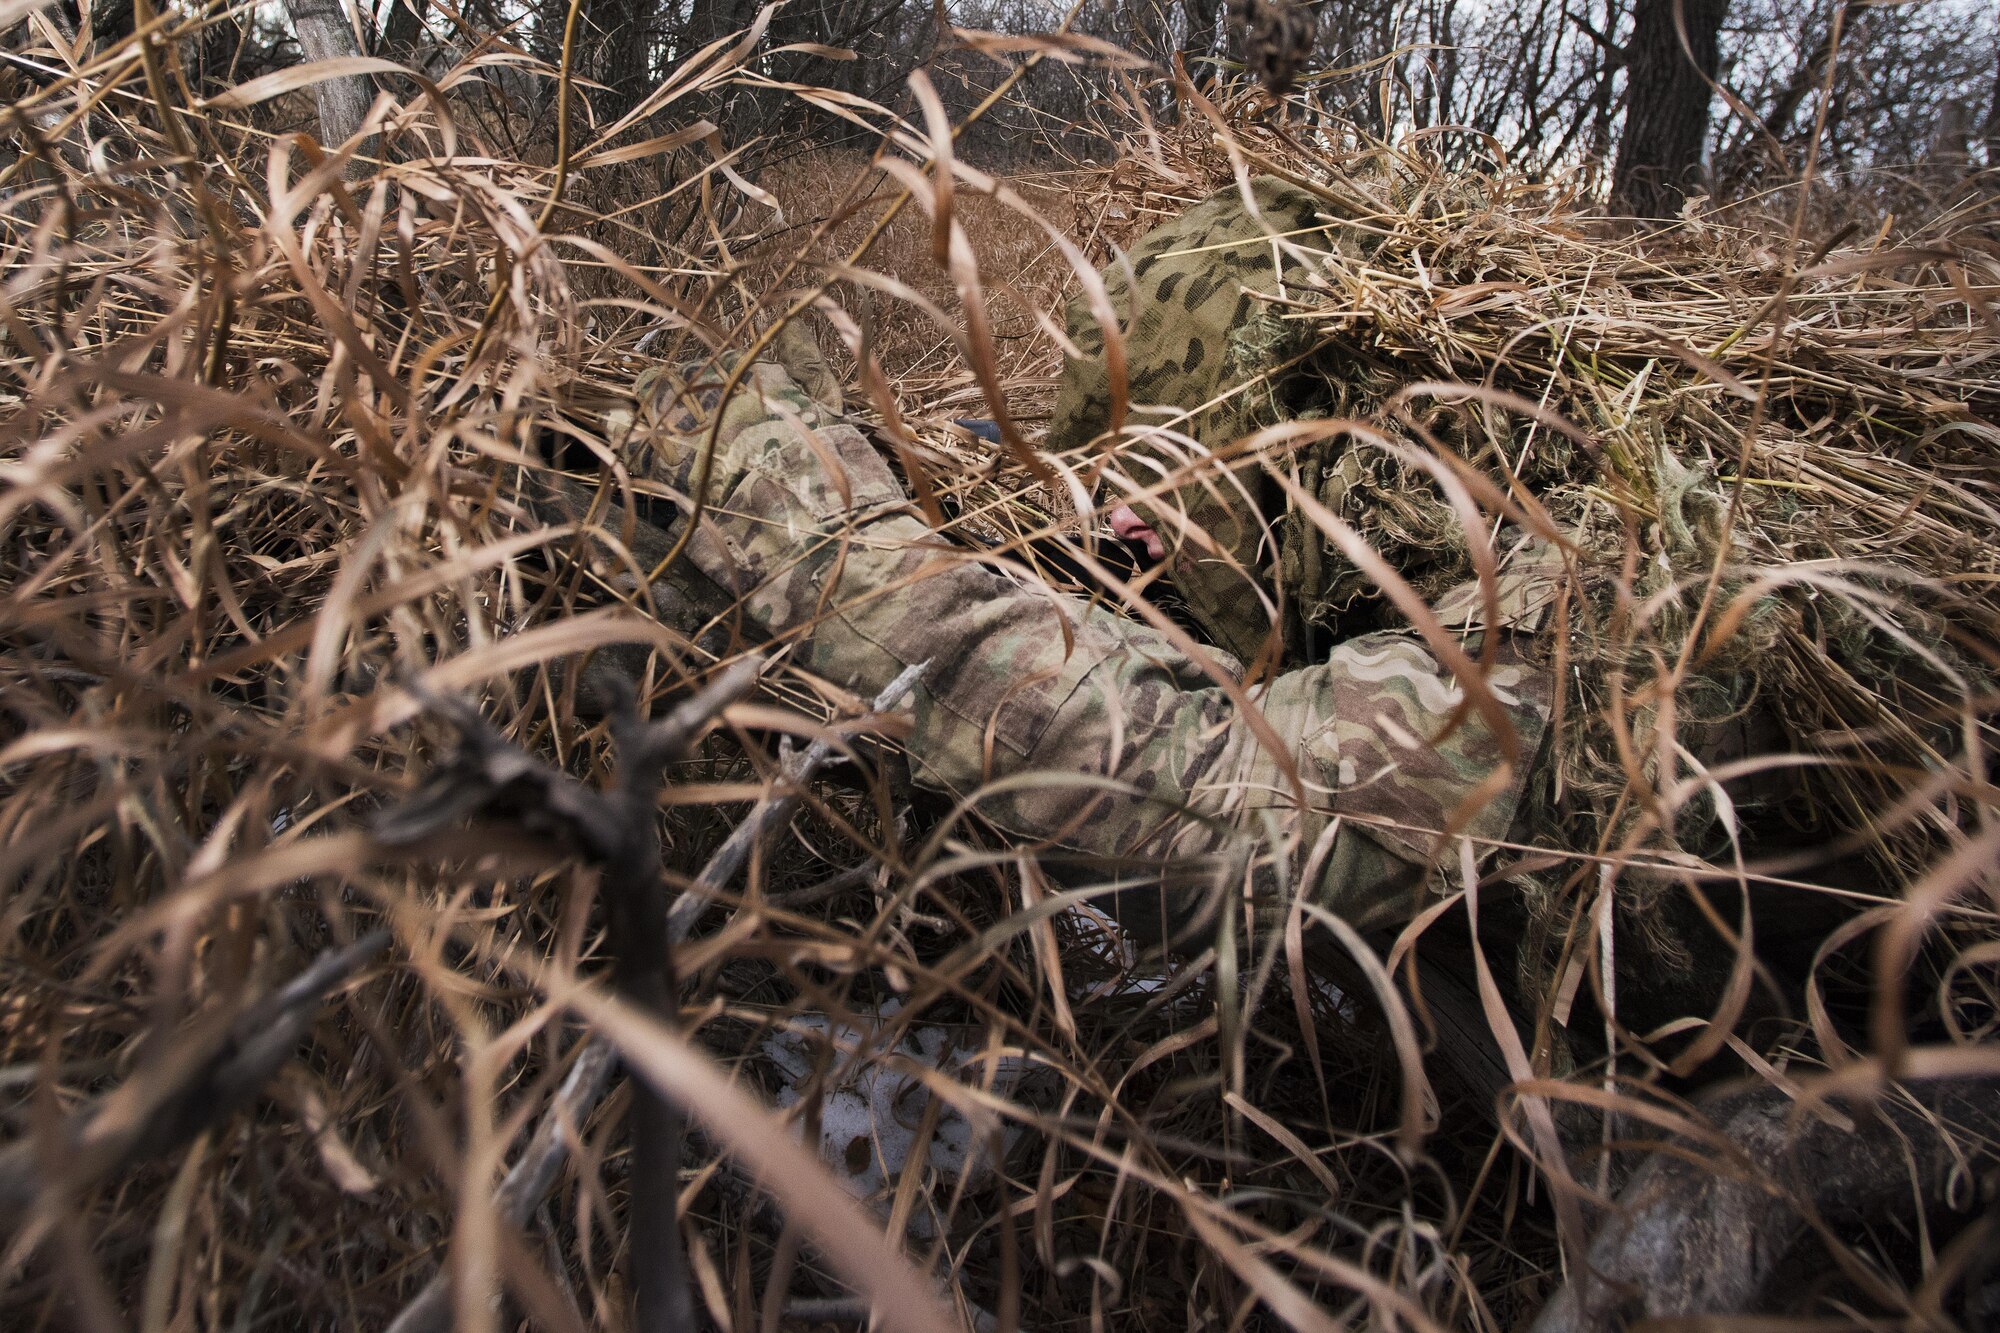 A 791st Missile Security Forces Squadron marksman looks through his rifle scope during joint-unit training at Minot Air Force Base, N.D., Nov. 22, 2017. During training, marksmen teams observed a 5th Security Forces Squadron military working dog team while gathering intelligence and avoiding detection. (U.S. Air Force photo by Senior Airman J.T. Armstrong)